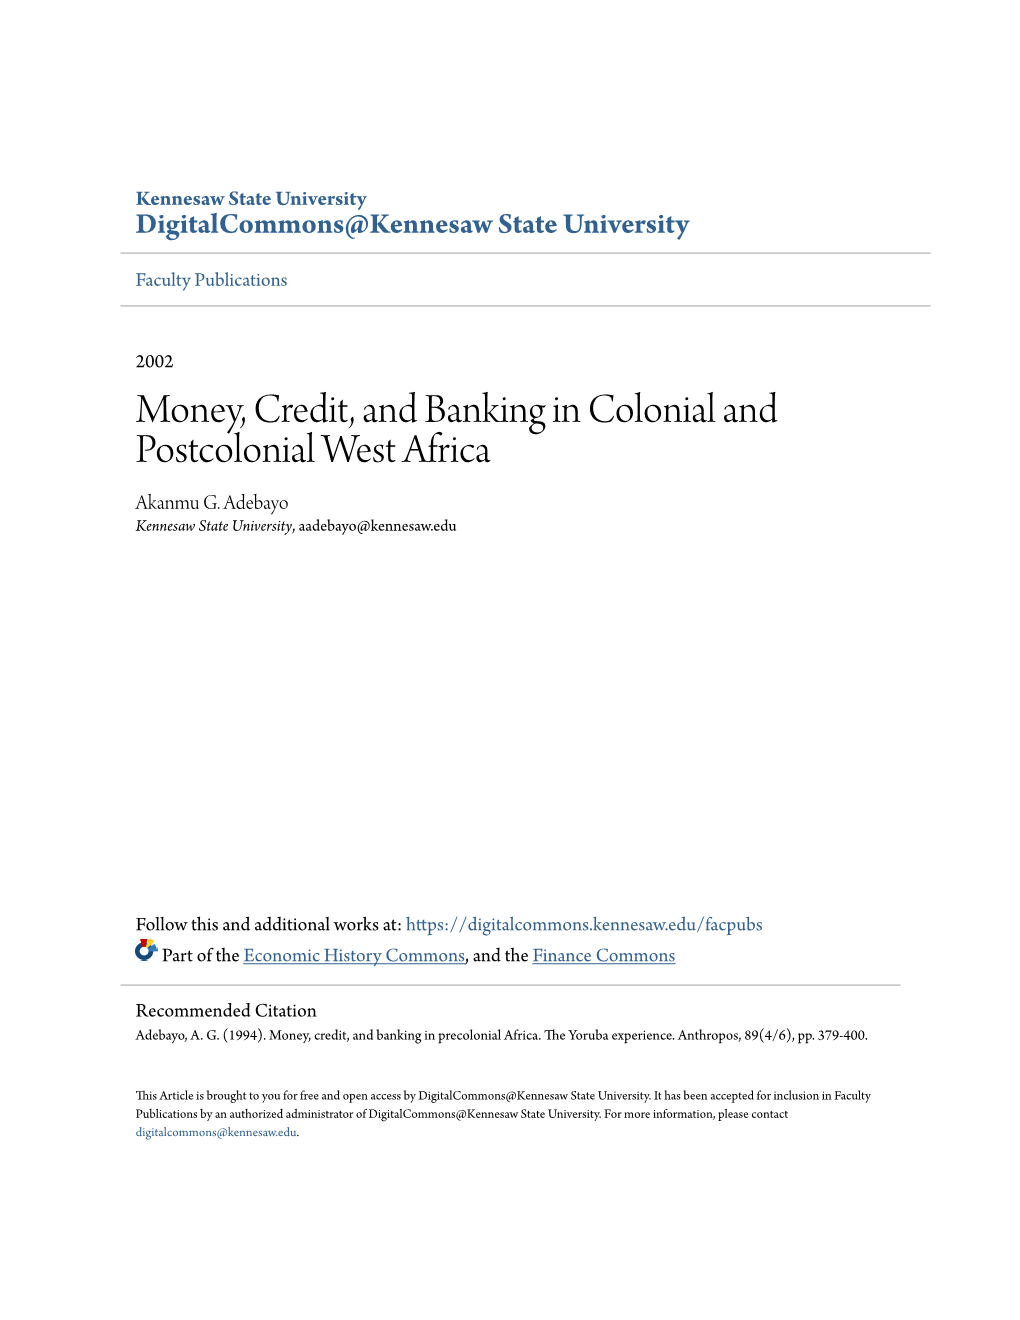 Money, Credit, and Banking in Colonial and Postcolonial West Africa Akanmu G